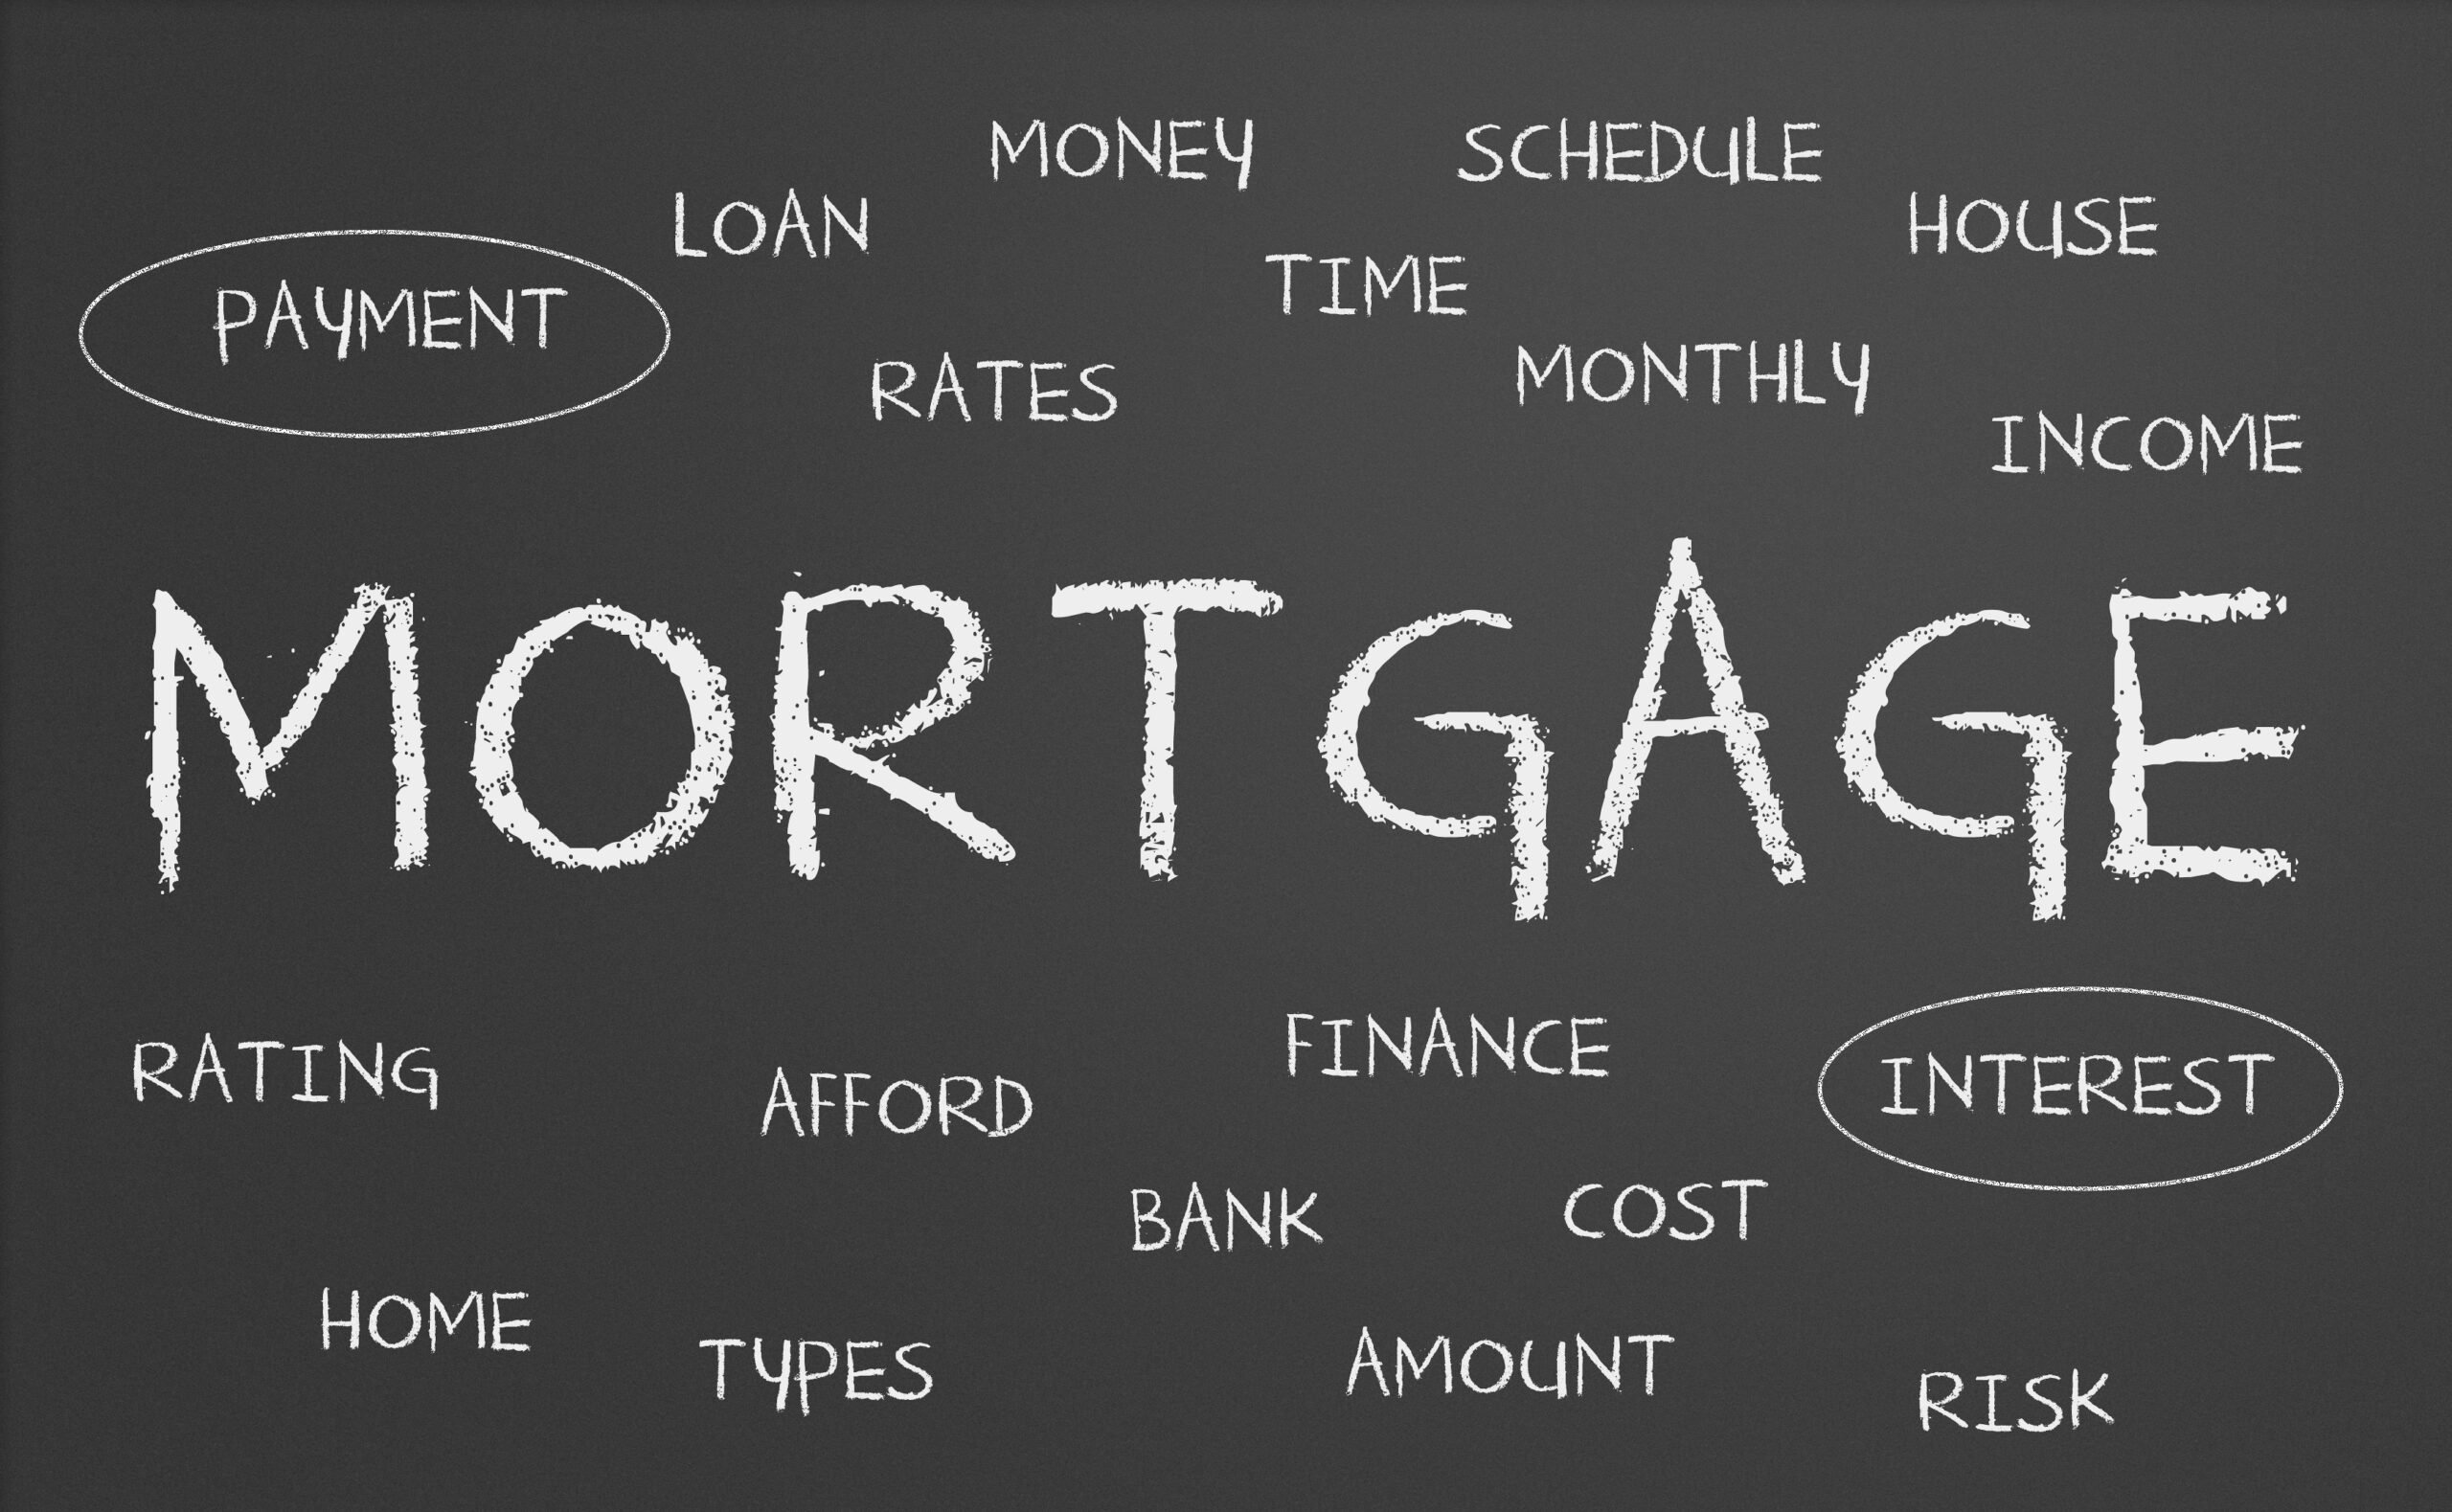 Mortgage rates and your home